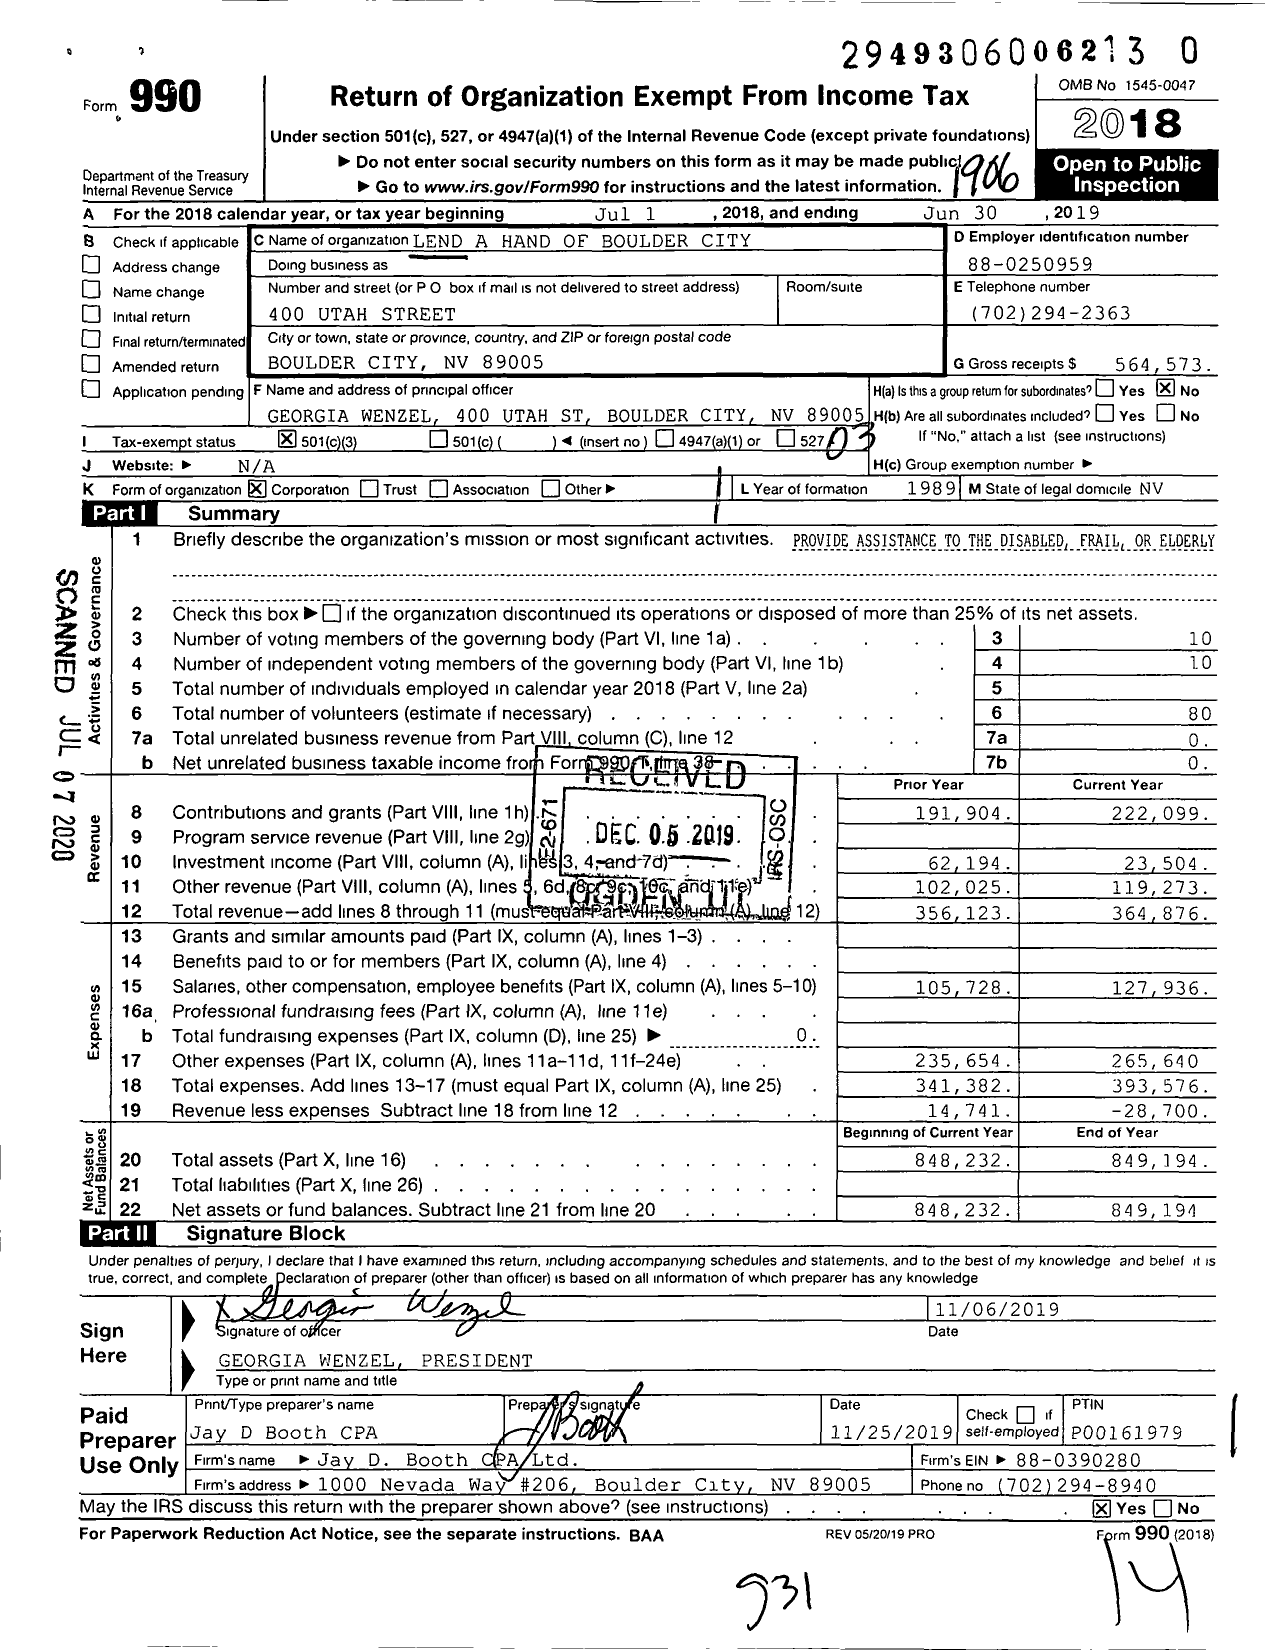 Image of first page of 2018 Form 990 for Lend A Hand of Boulder City